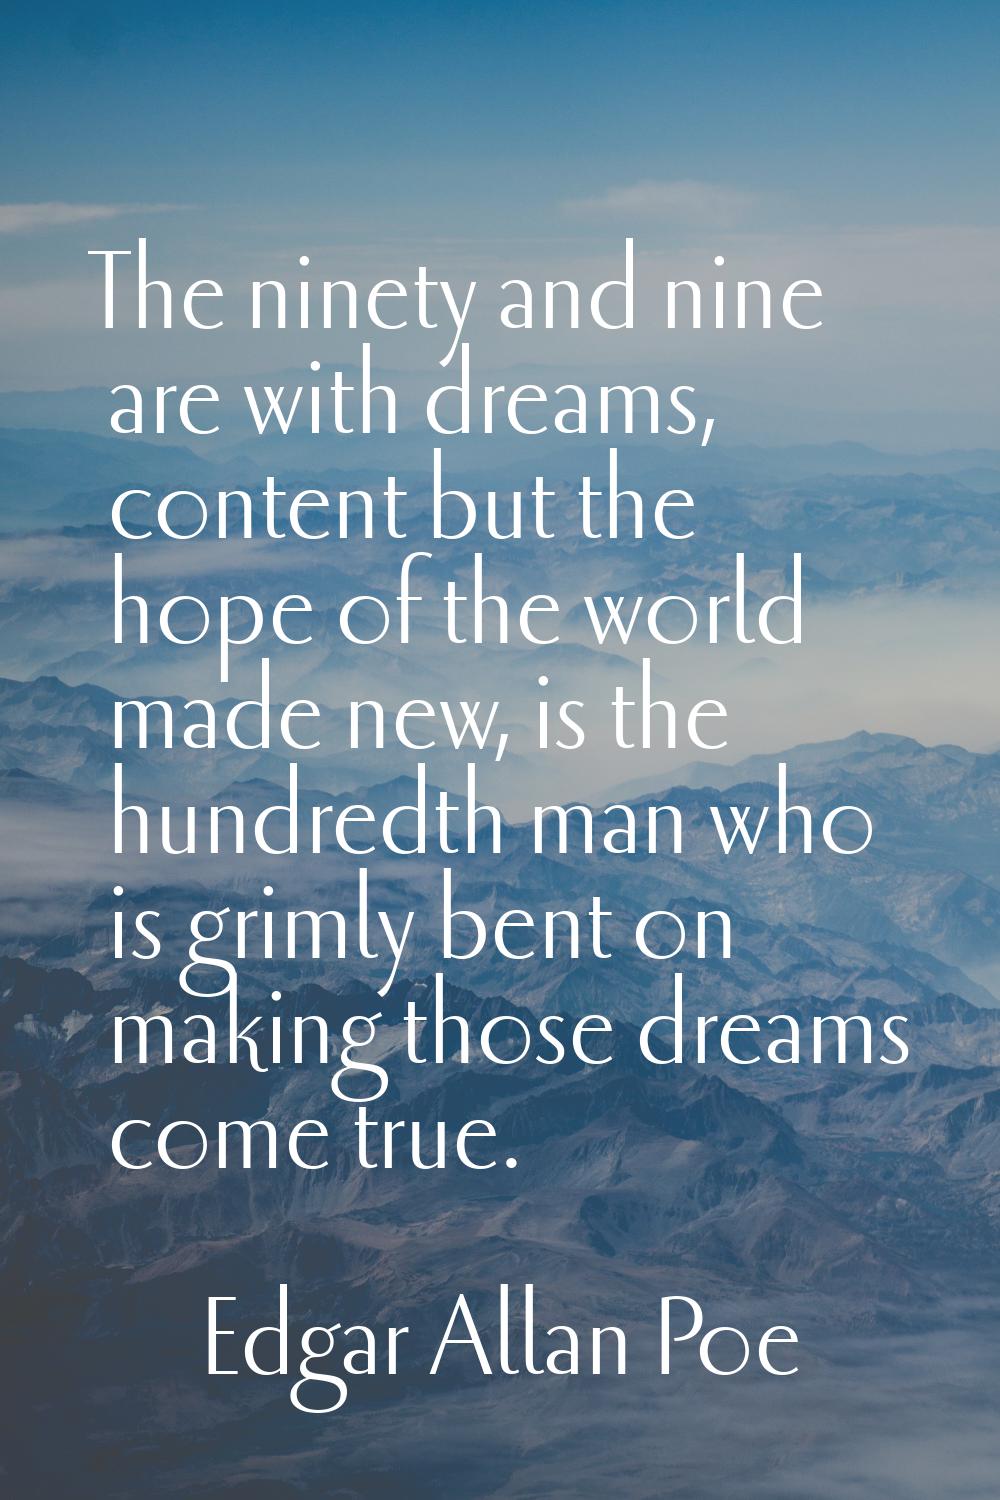 The ninety and nine are with dreams, content but the hope of the world made new, is the hundredth m